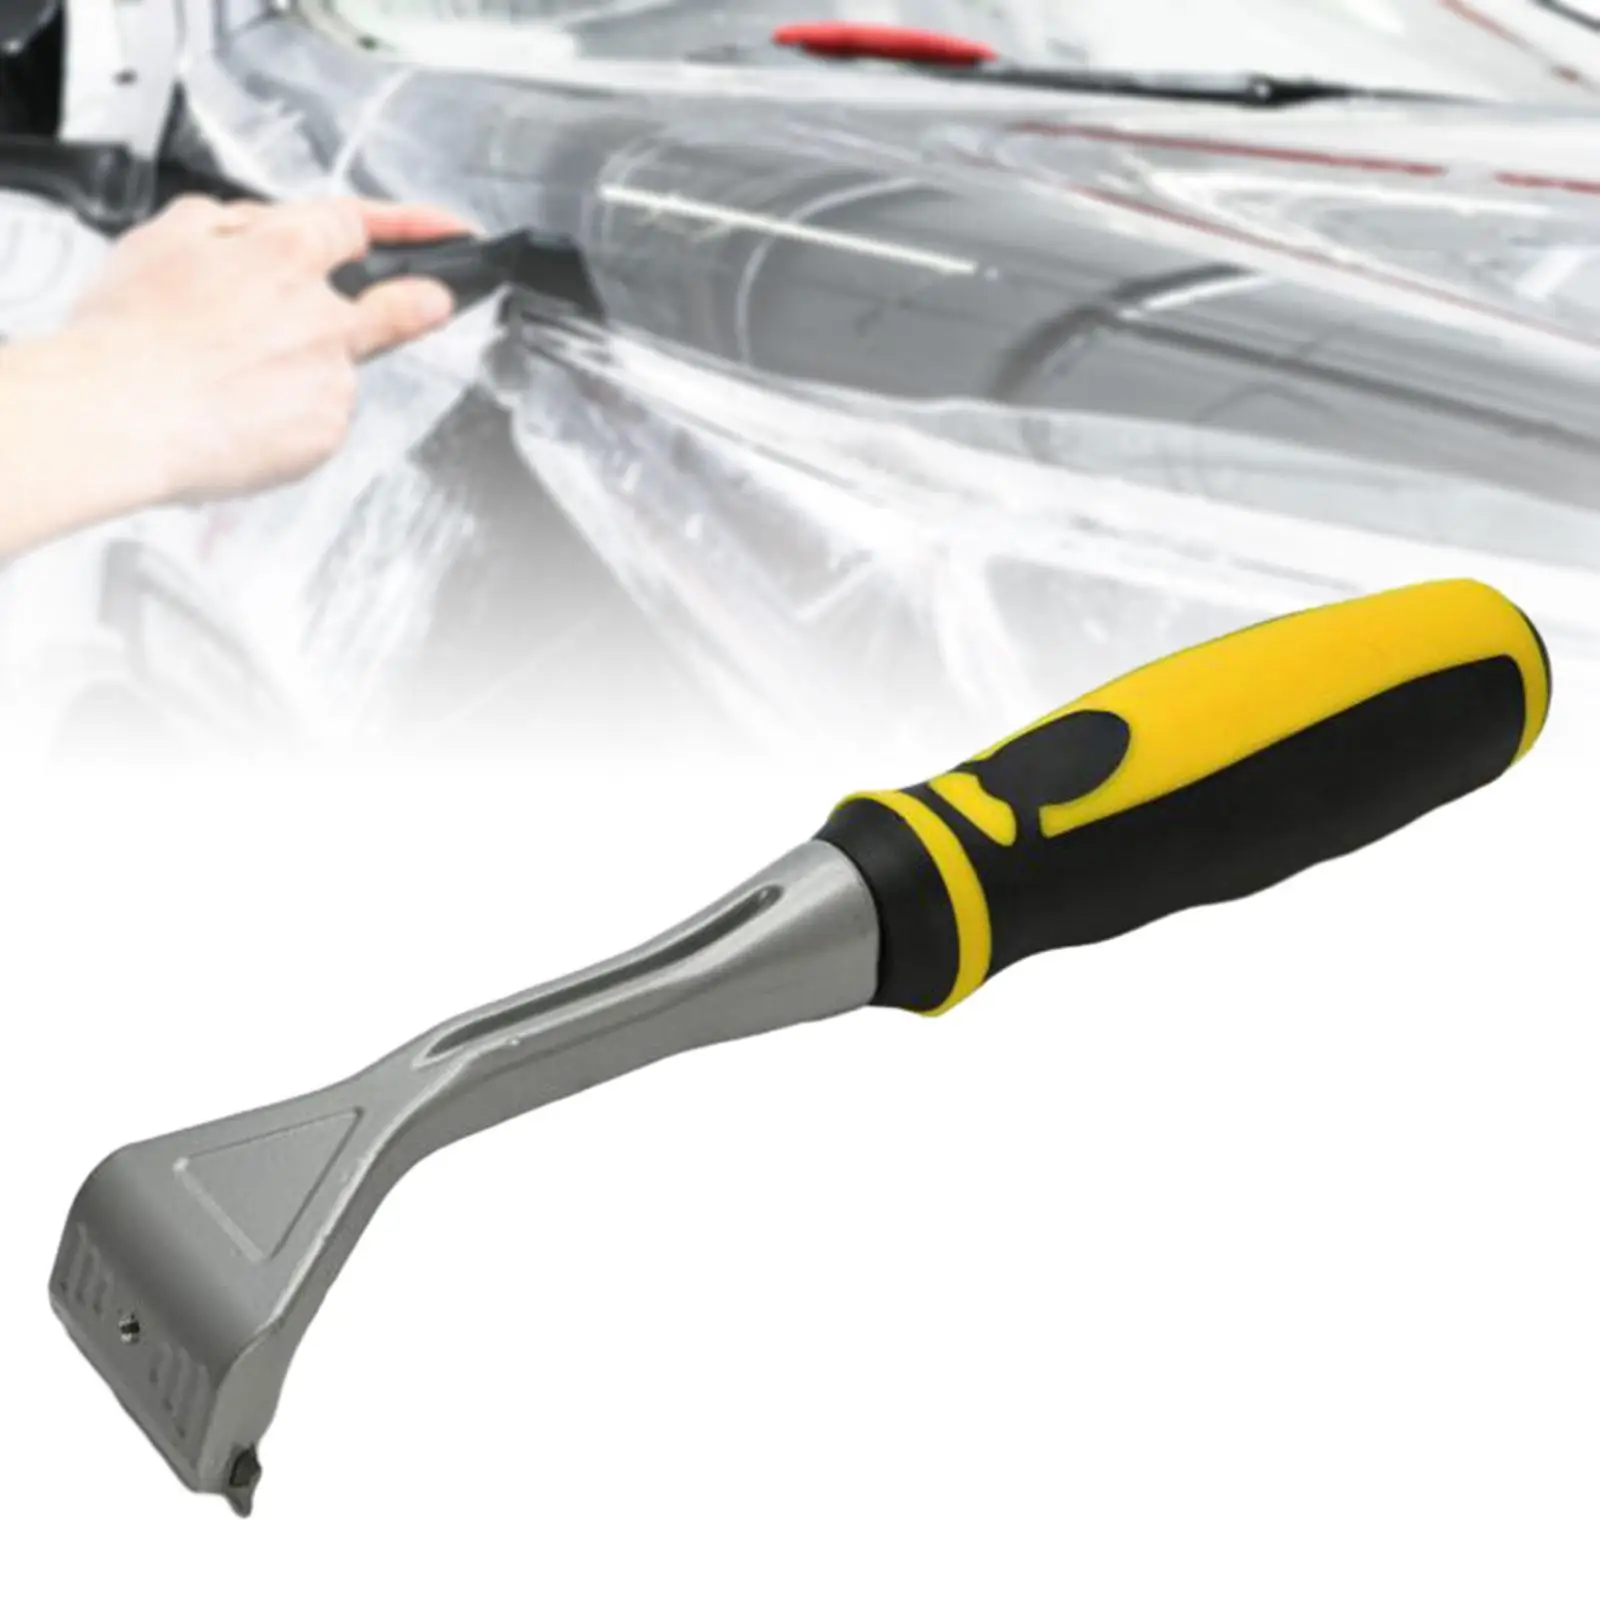 

Blade Scraper Tool Paint Removal Tool Multifunctional Comfortable Grip 10x2inch Aluminum Headed for Floor Tile Adhesive Sturdy